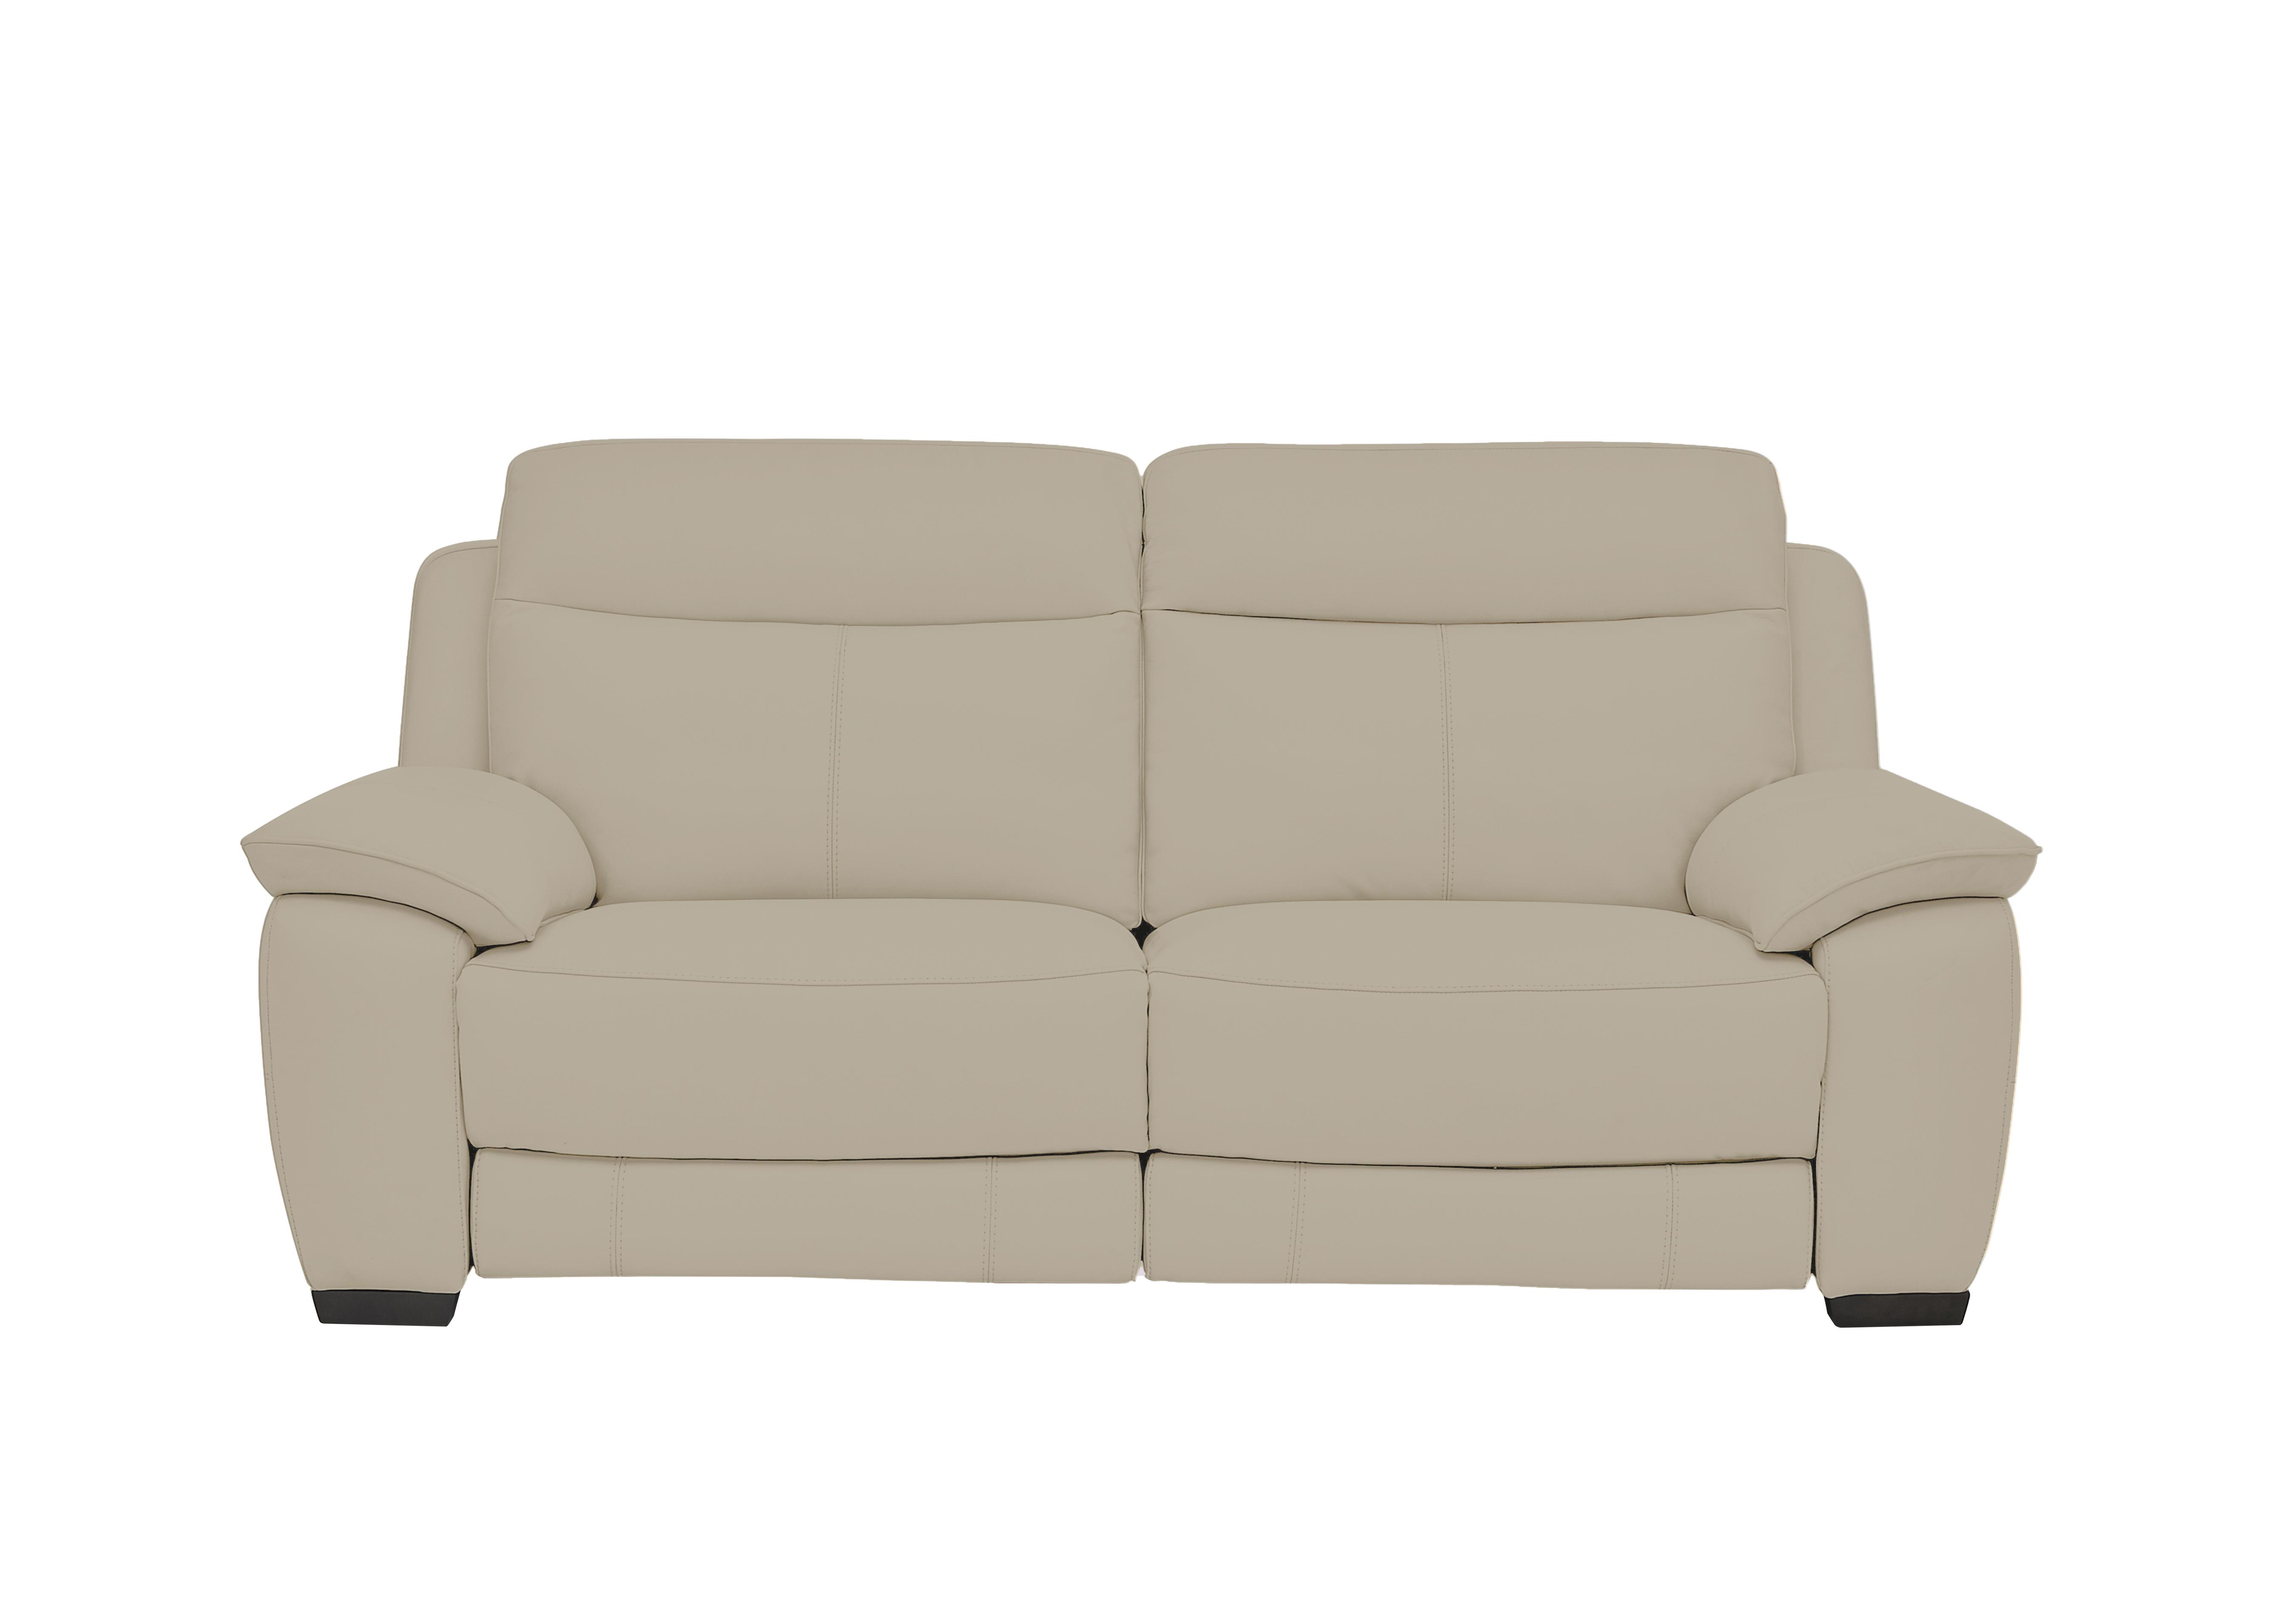 Starlight Express 3 Seater Leather Recliner Sofa with Power Headrests in Bv-041e Dapple Grey on Furniture Village